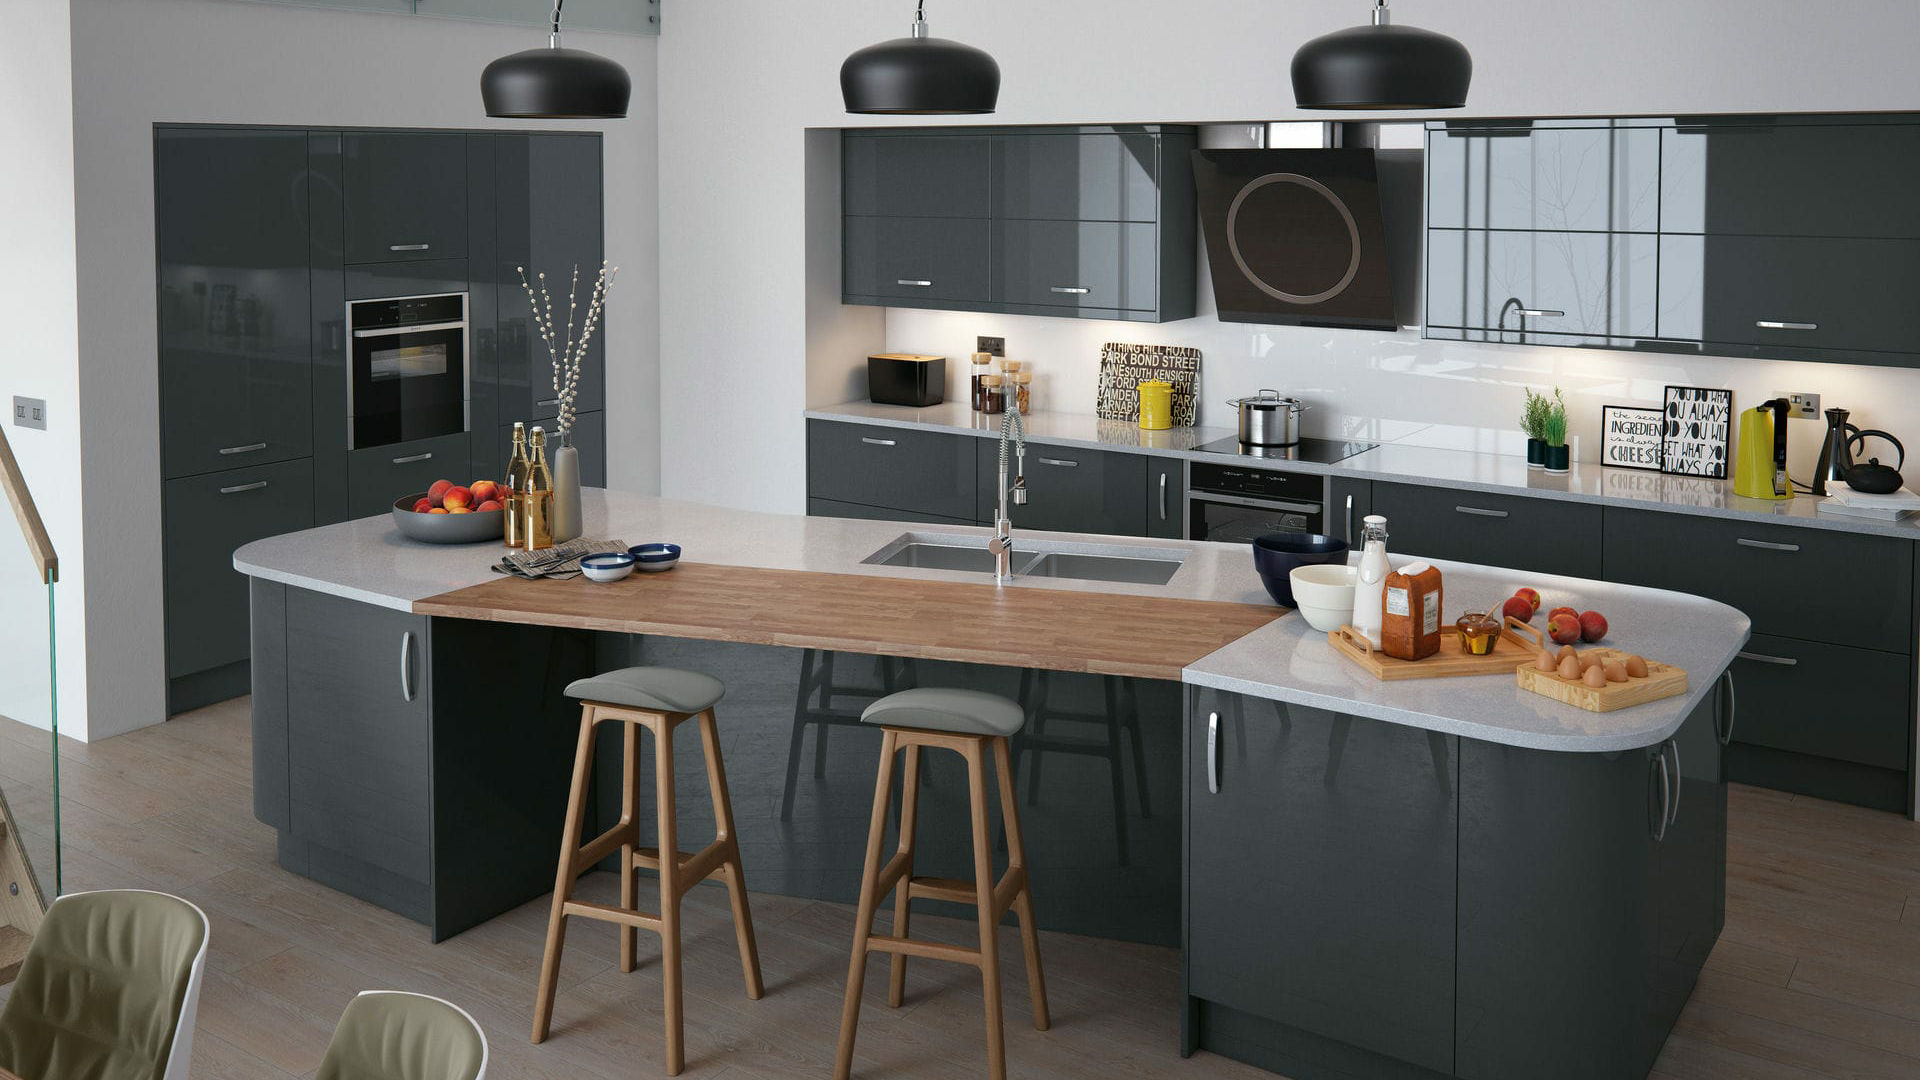 High gloss anthracite kitchens designed to reflect light for a dramatic and sophisticated kitchen environment